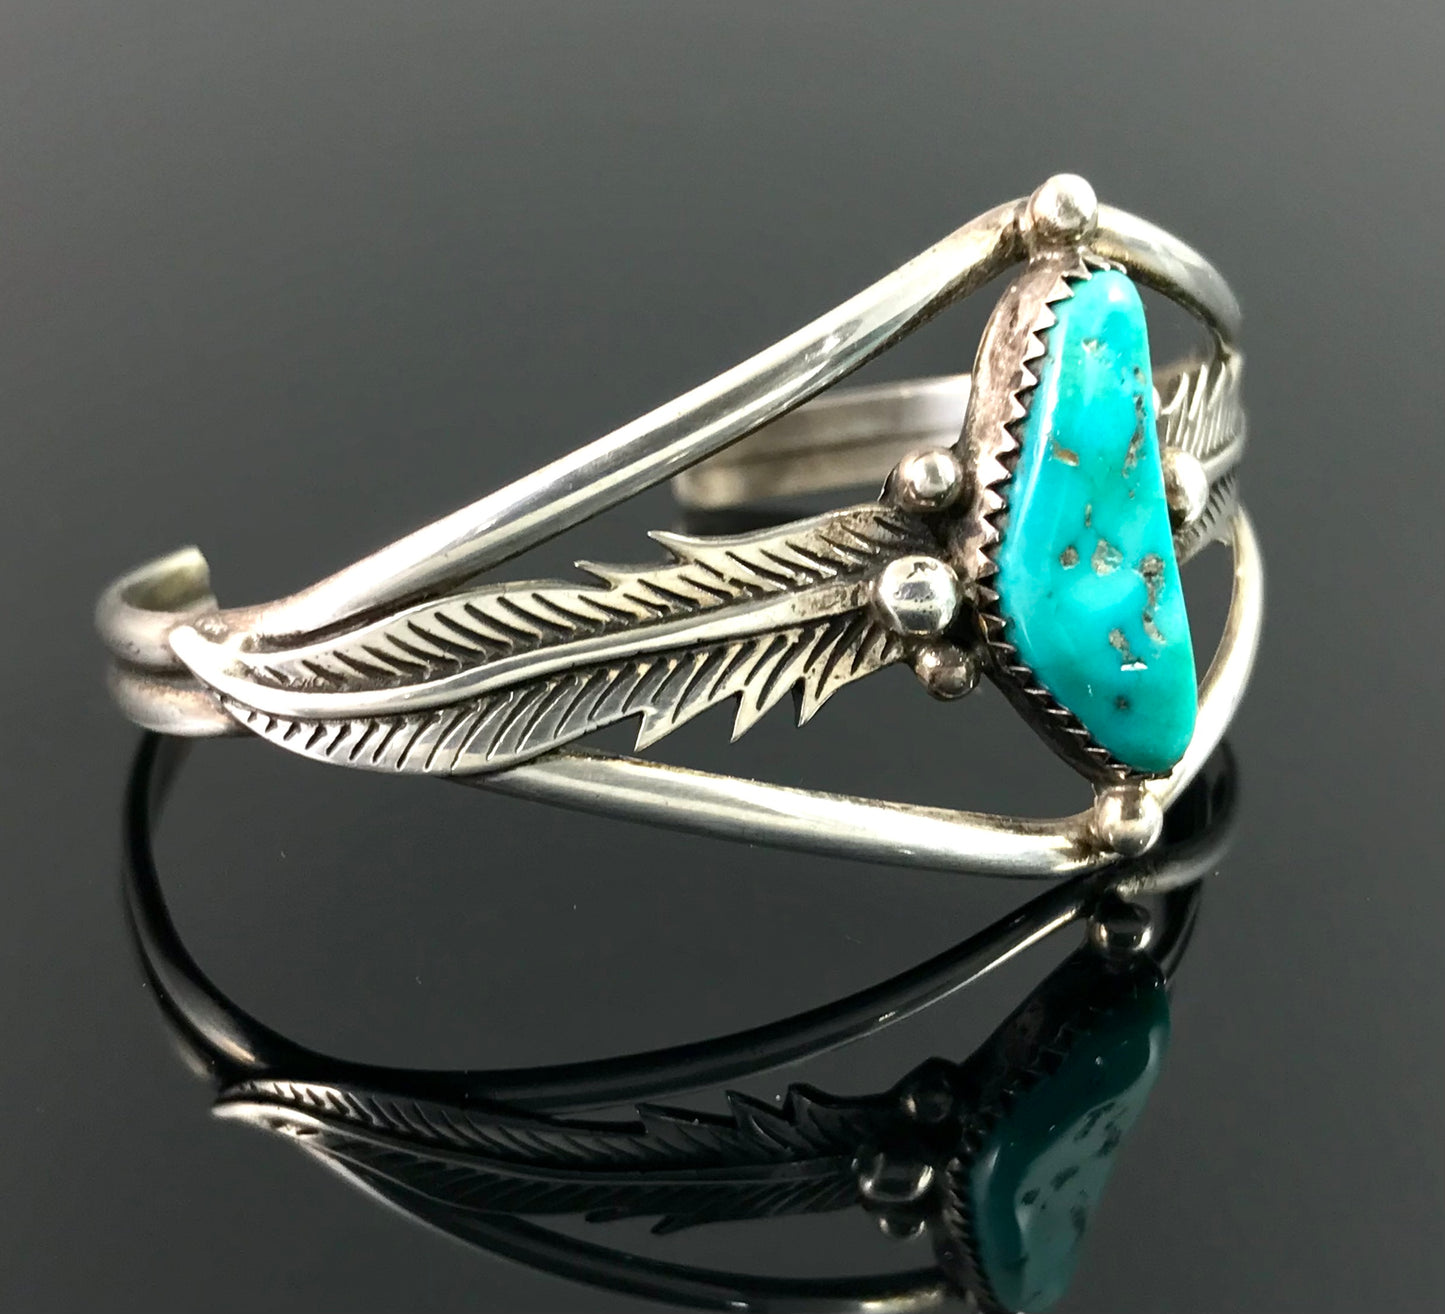 Turquoise and Feathers Navajo Native American Feathers Cuff Bracelet - Edward Becenti